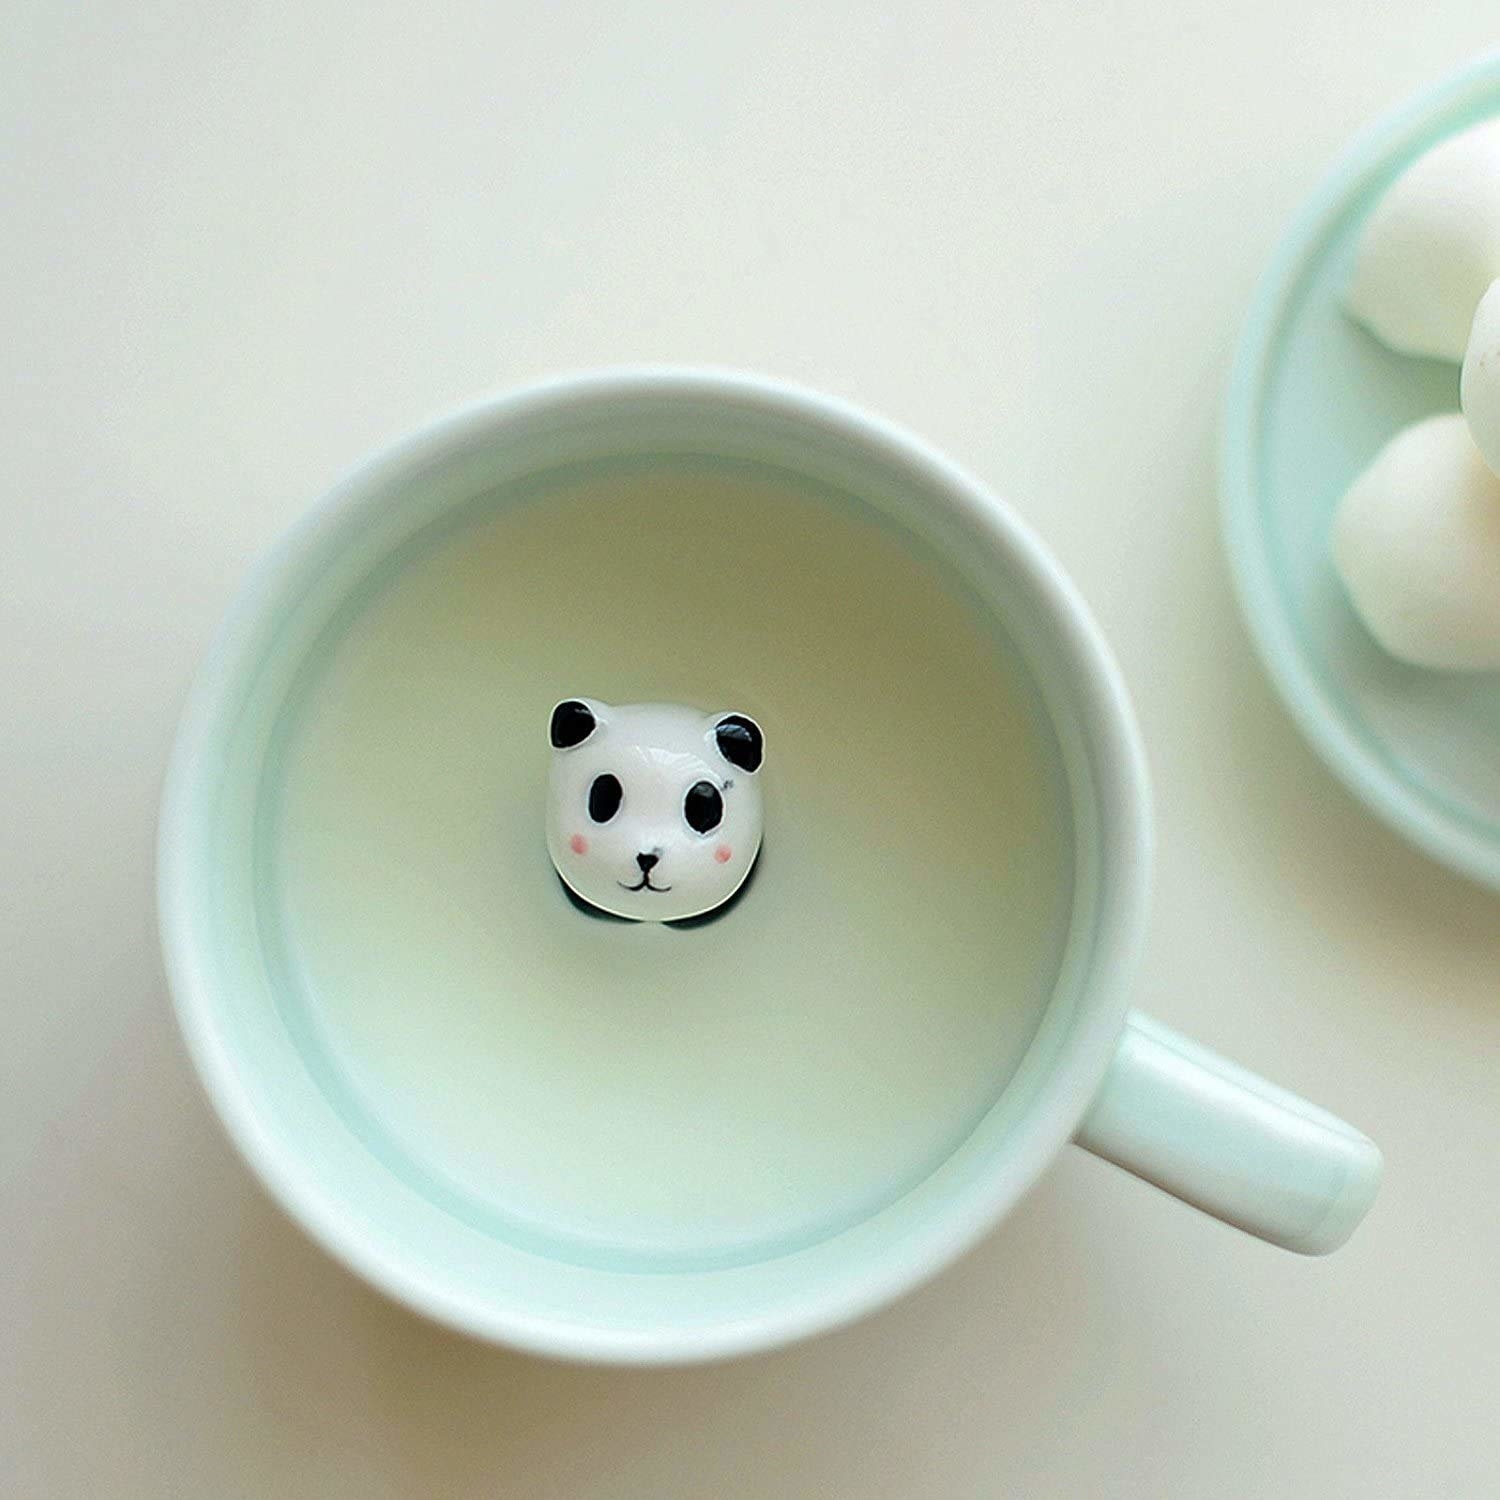 A mug with some milk in it and a panda looking up from it